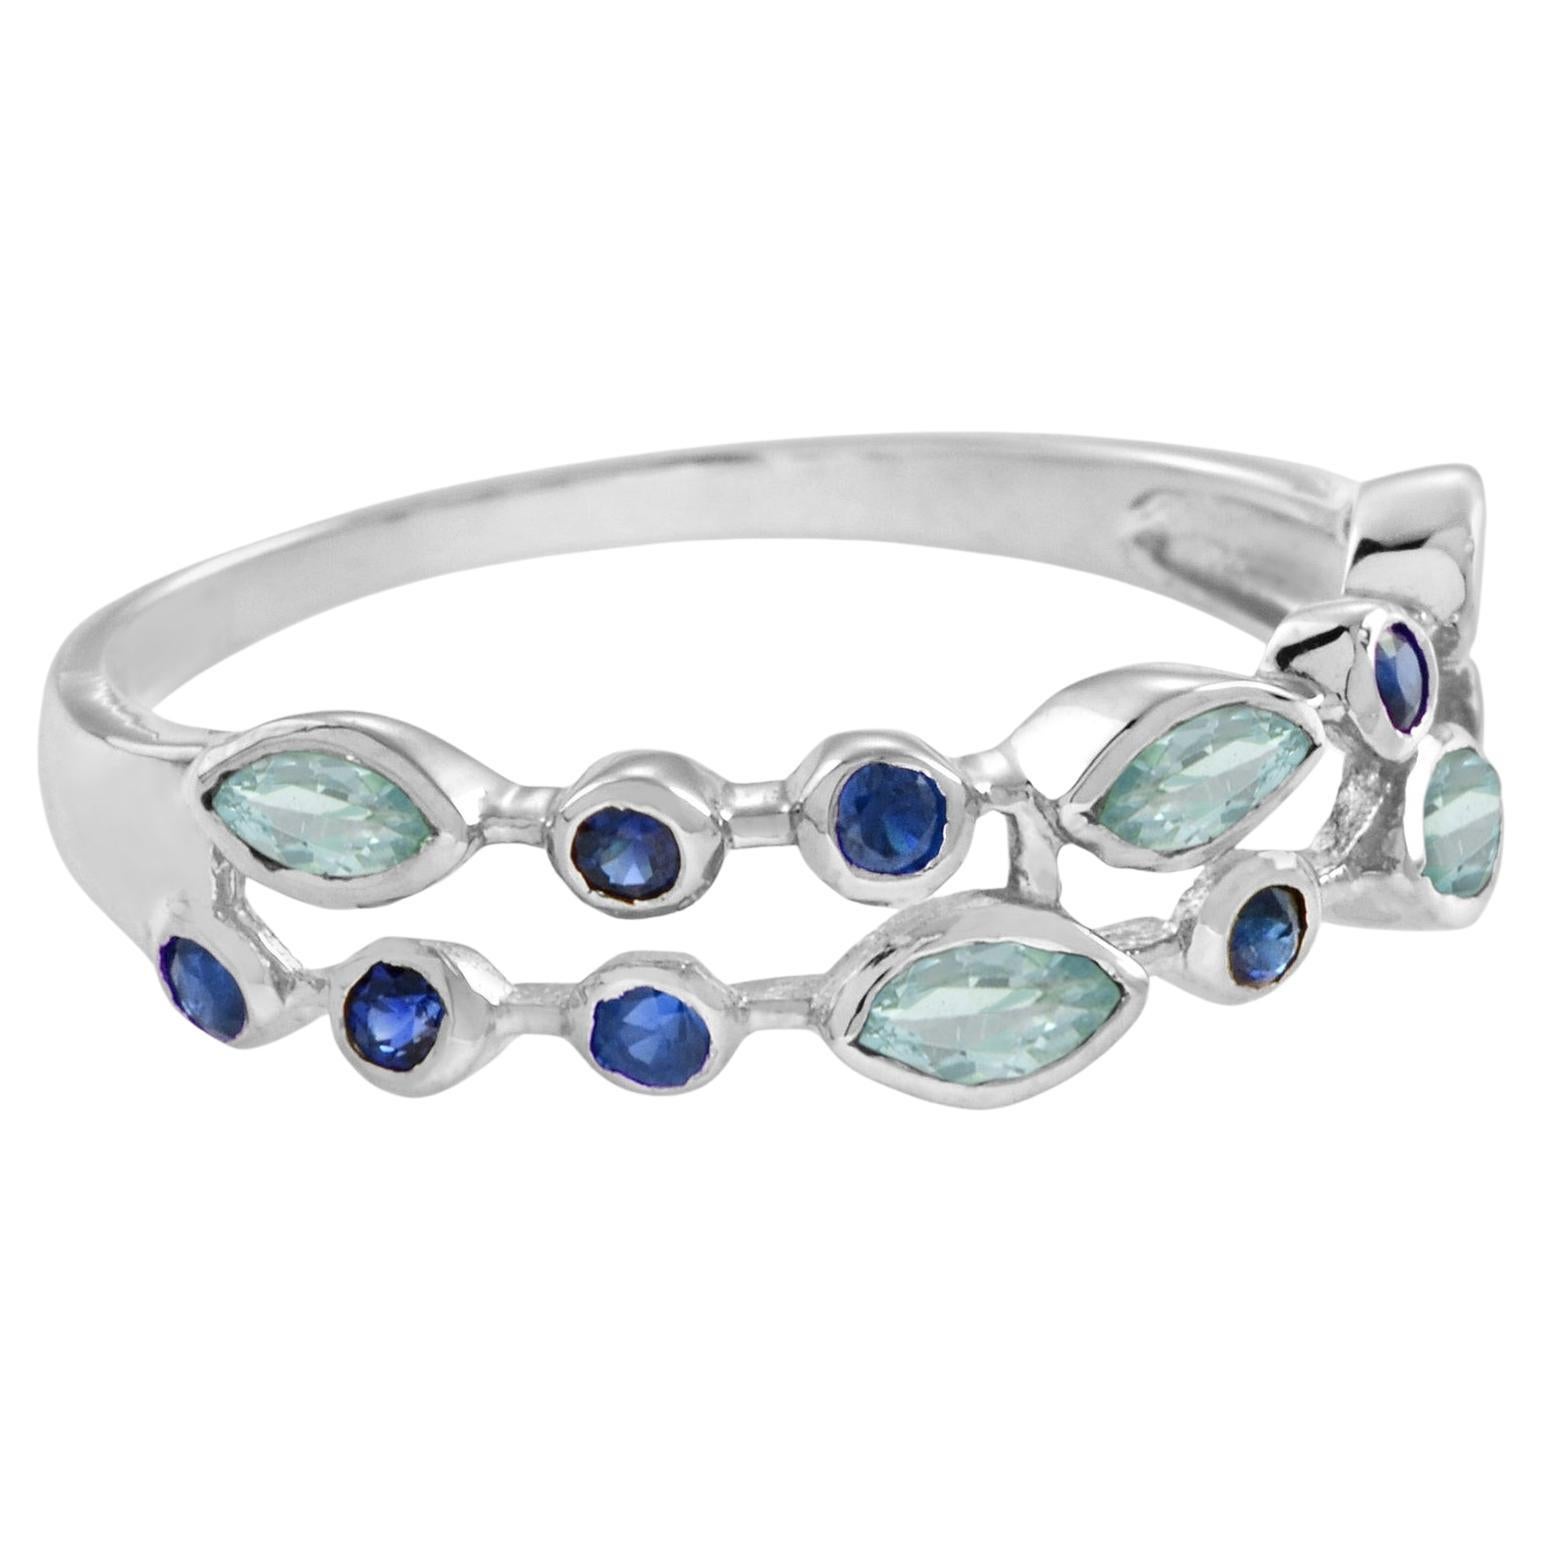 Double Row Aquamarine and Sapphire Eternity Ring in 14K White Gold